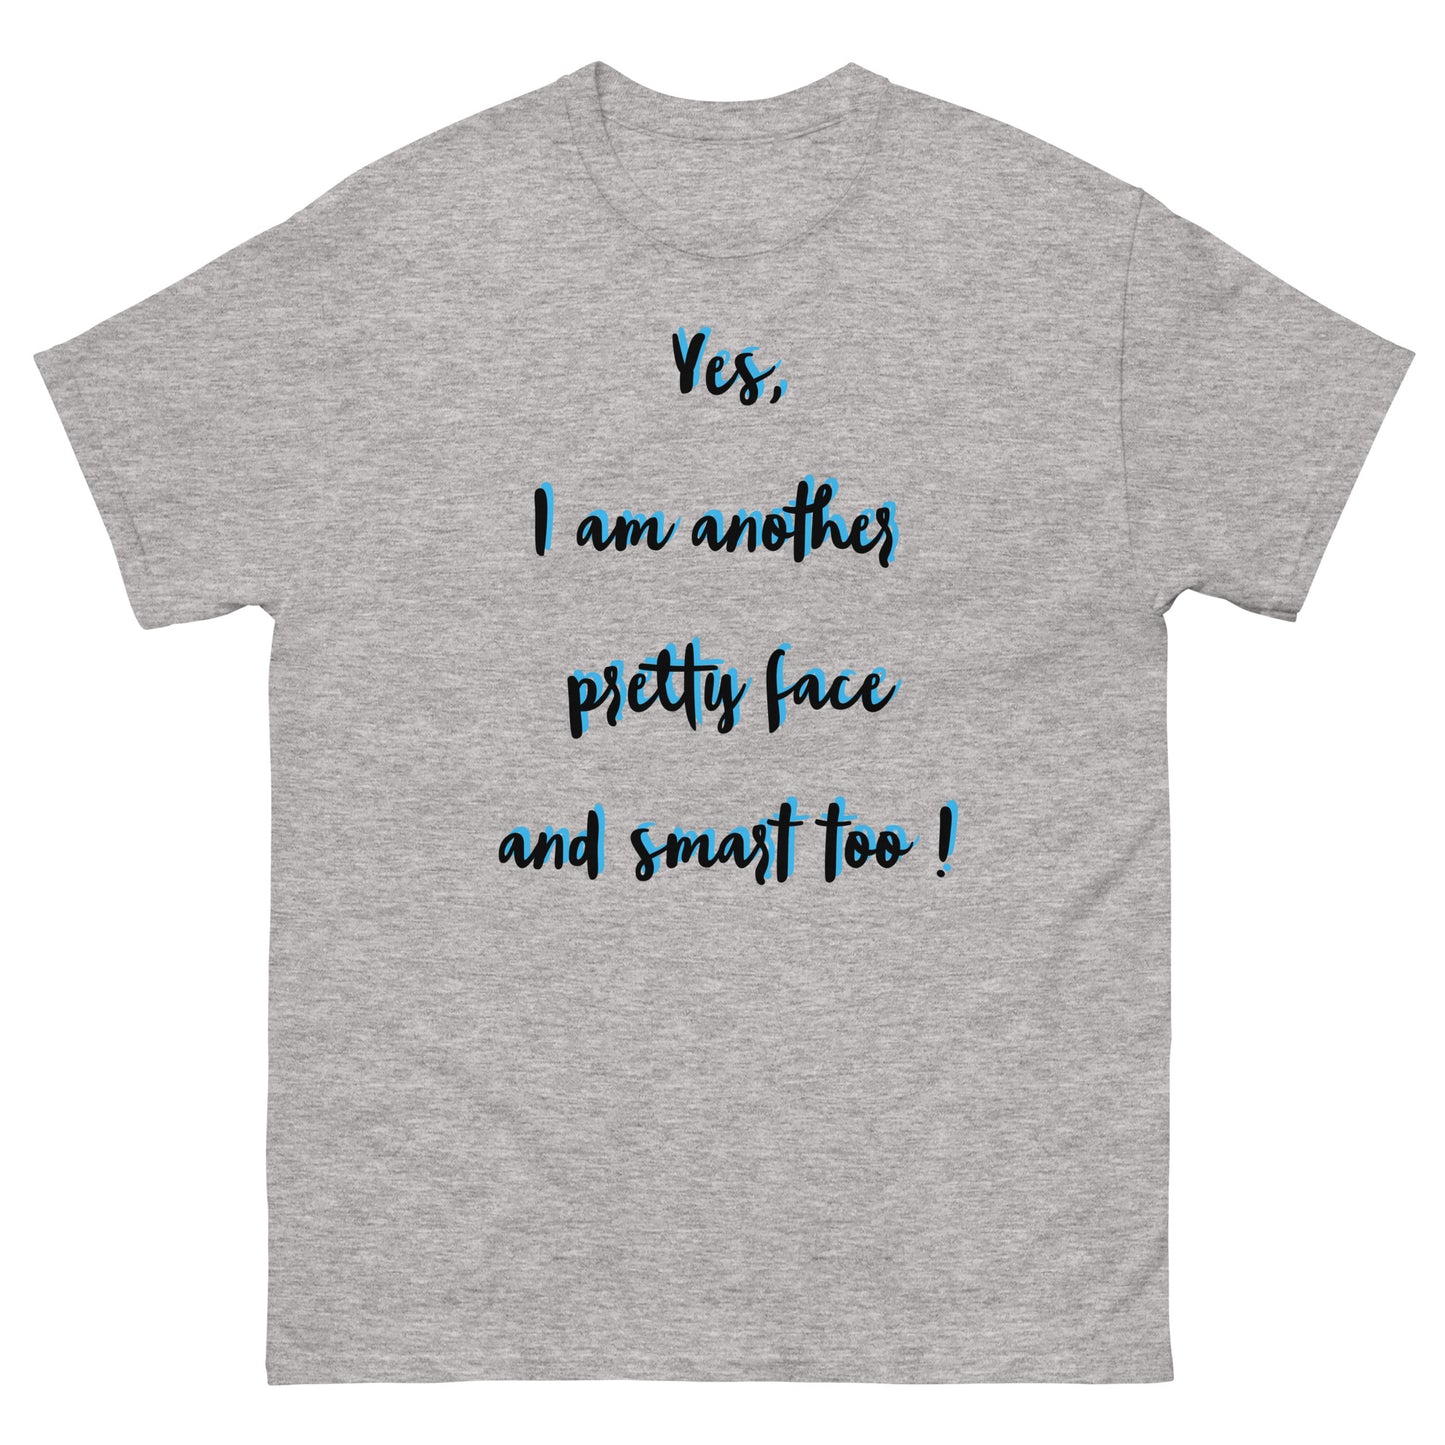 Yes, I am another pretty face and smart too ! Men's classic tee